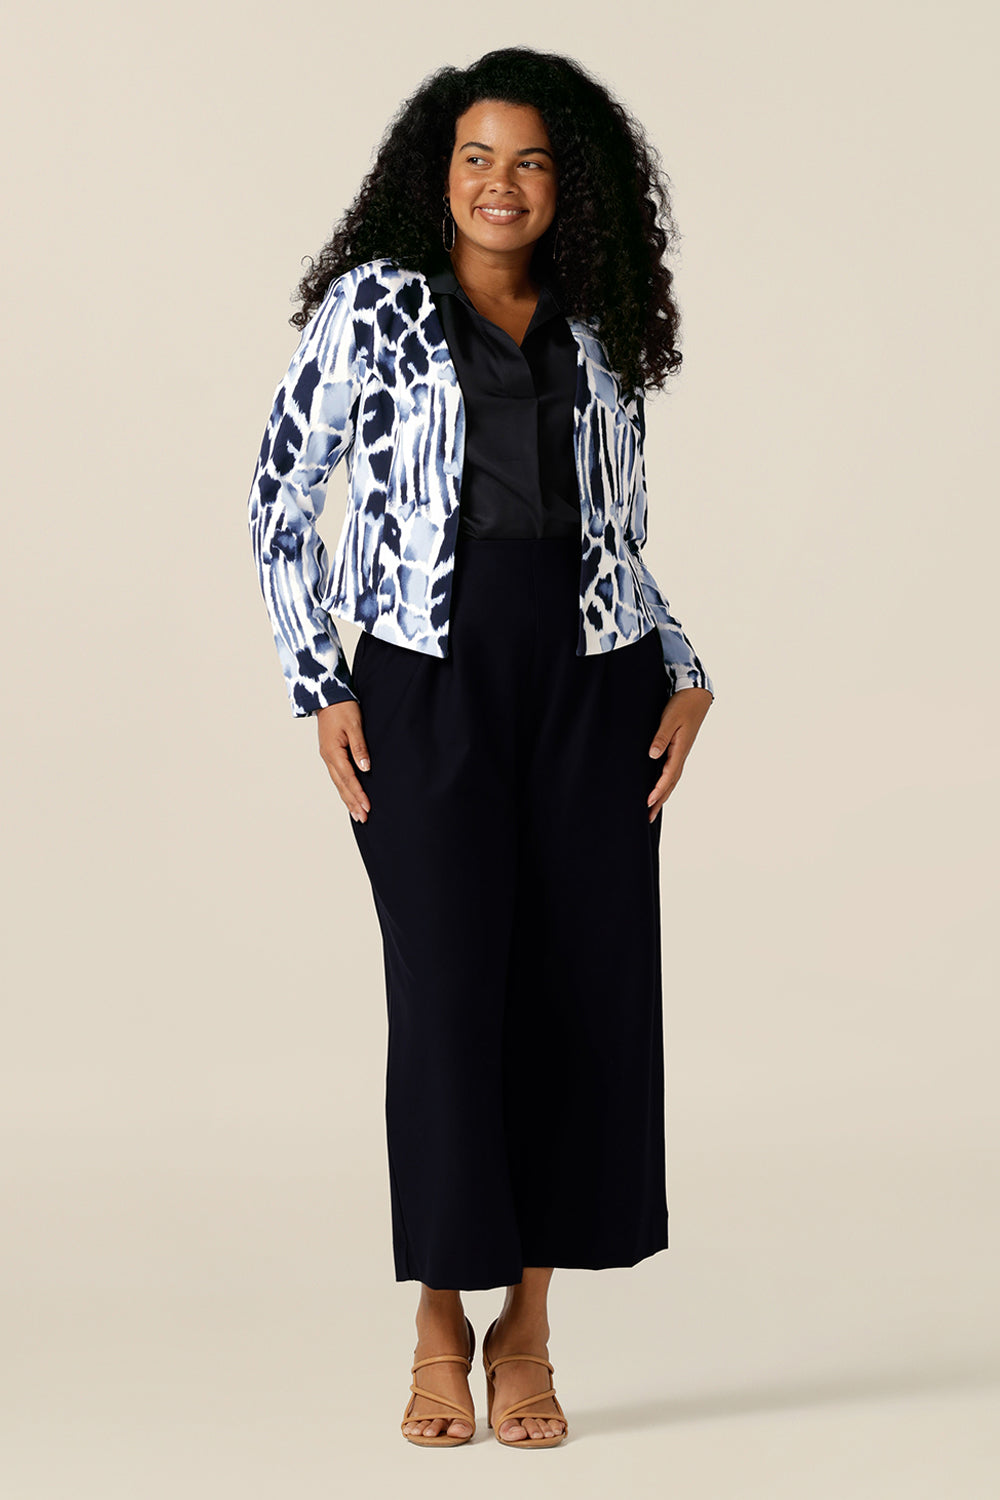  A size 12, curvy woman wears a collarless open front jacket for work and corporate wear. In navy and white jersey, this is a tailored jacket with stretch for all-day wear as a comfortable office jacket. Styled with a navy blue shirt and navy pants, this women's corporate jacket completes the work wear outfit.